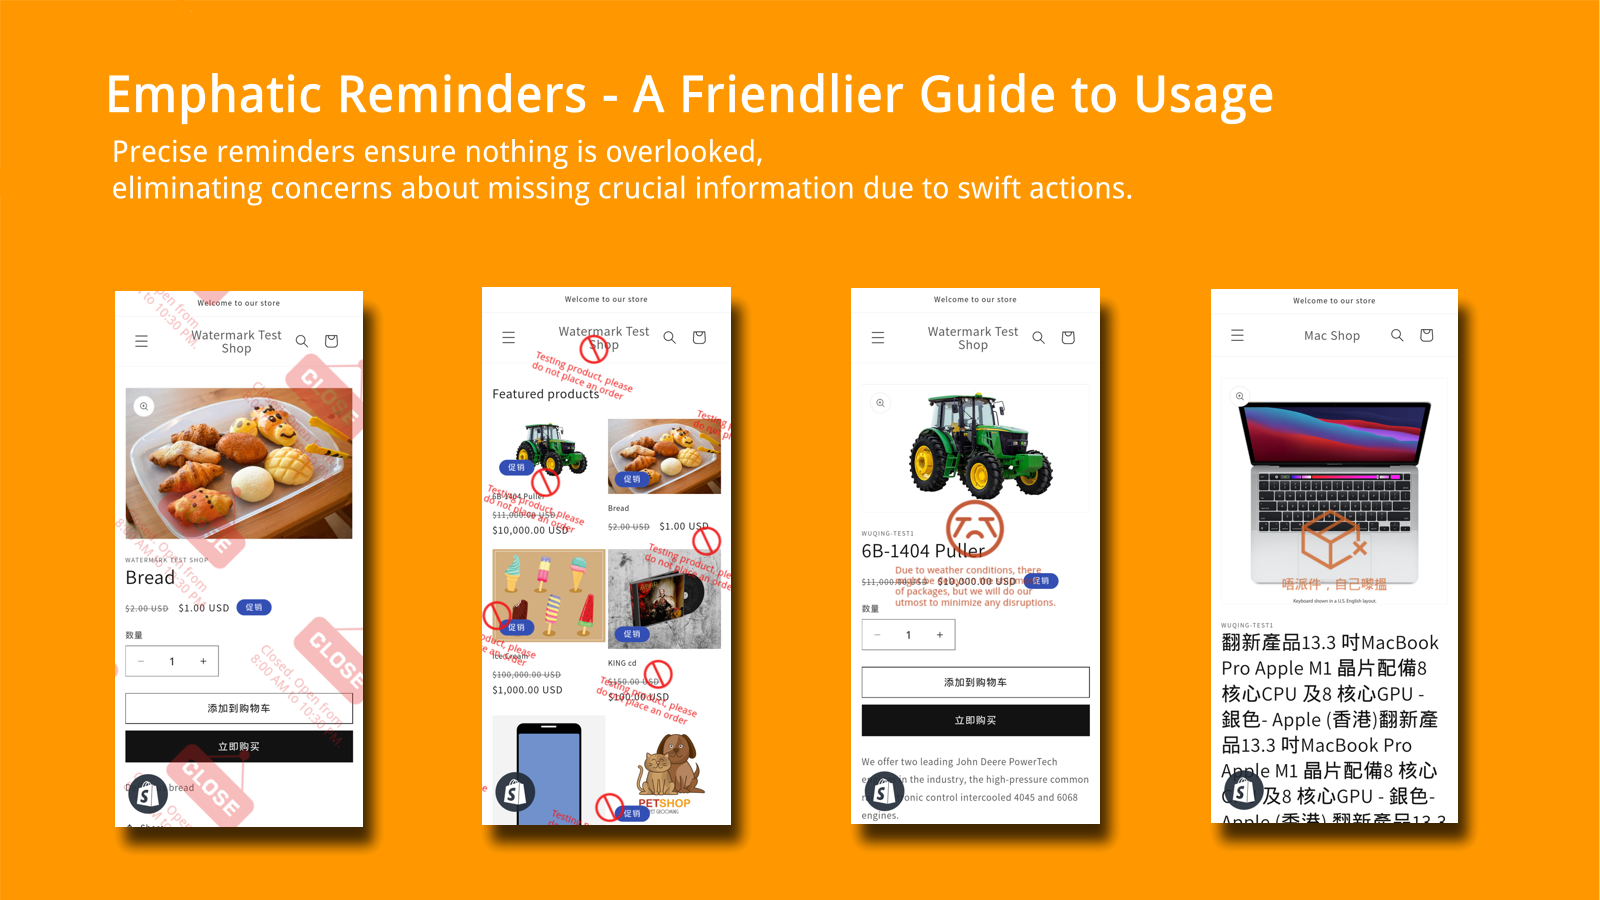 Emphatic Reminders - A Friendlier Guide to Usage